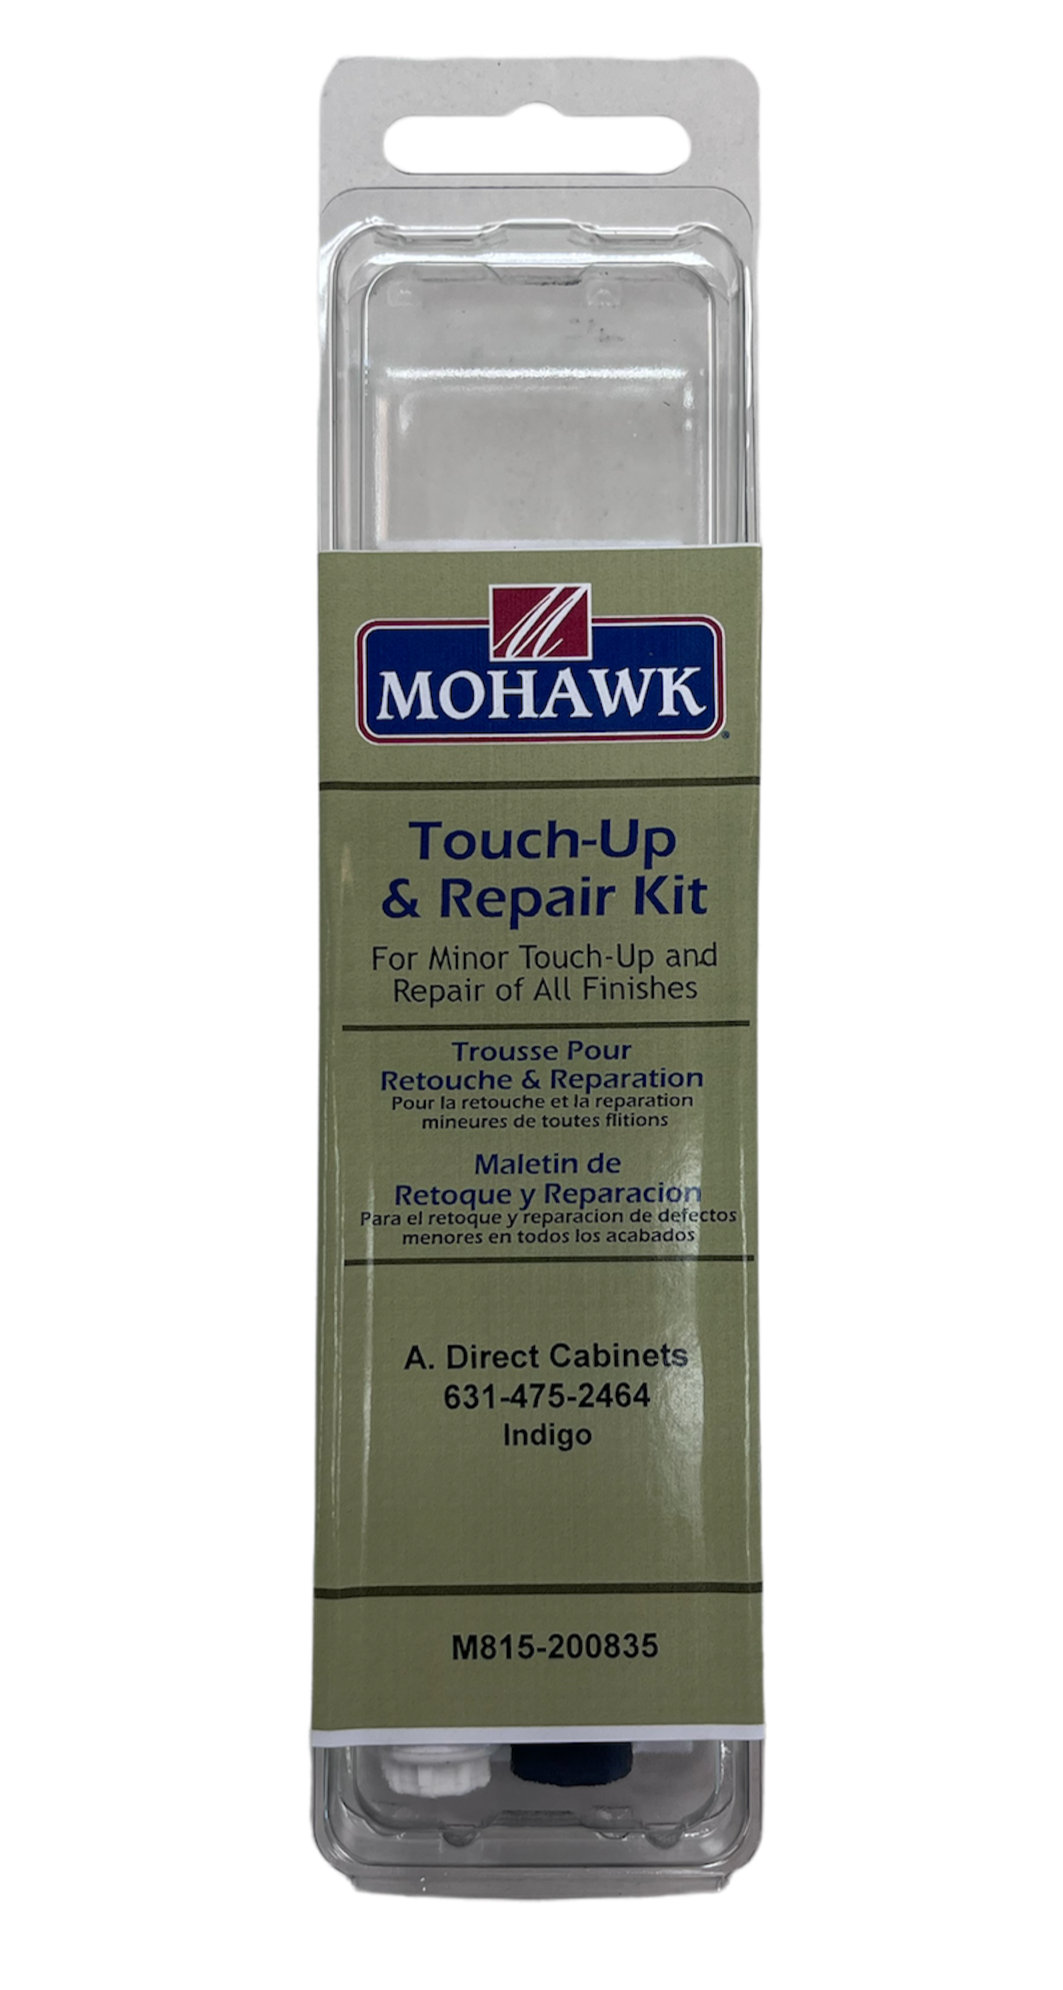 Fabuwood Indigo (Blue Paint) Touch-Up & Repair Kit for Fabuwood Cabinets-DirectCabinets.com